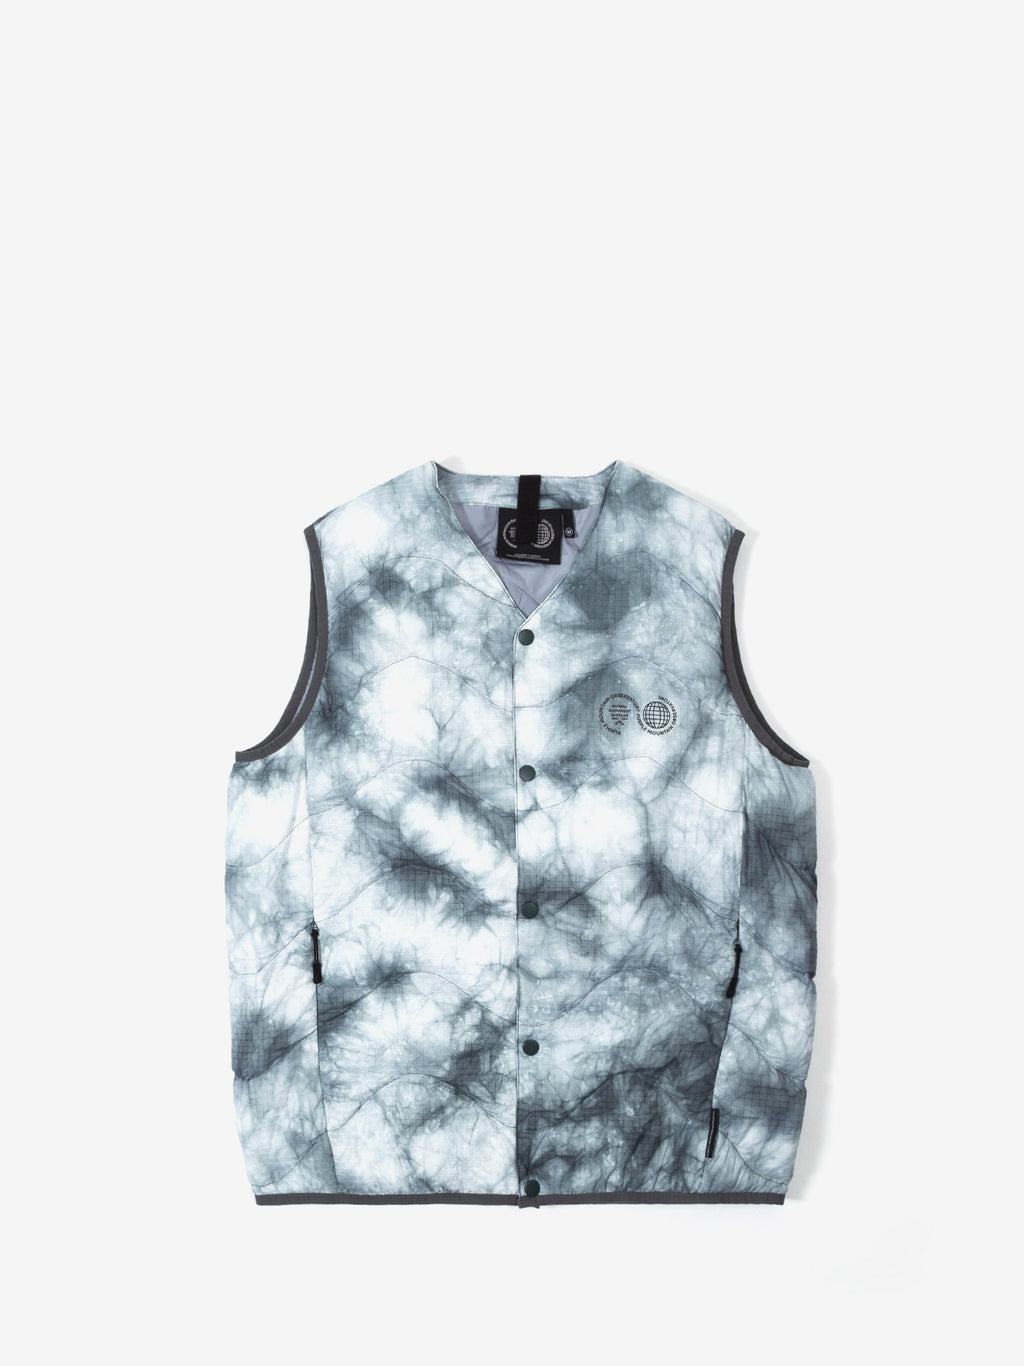 PMO Ice Dye Quilted Vest Grey Tie Dye